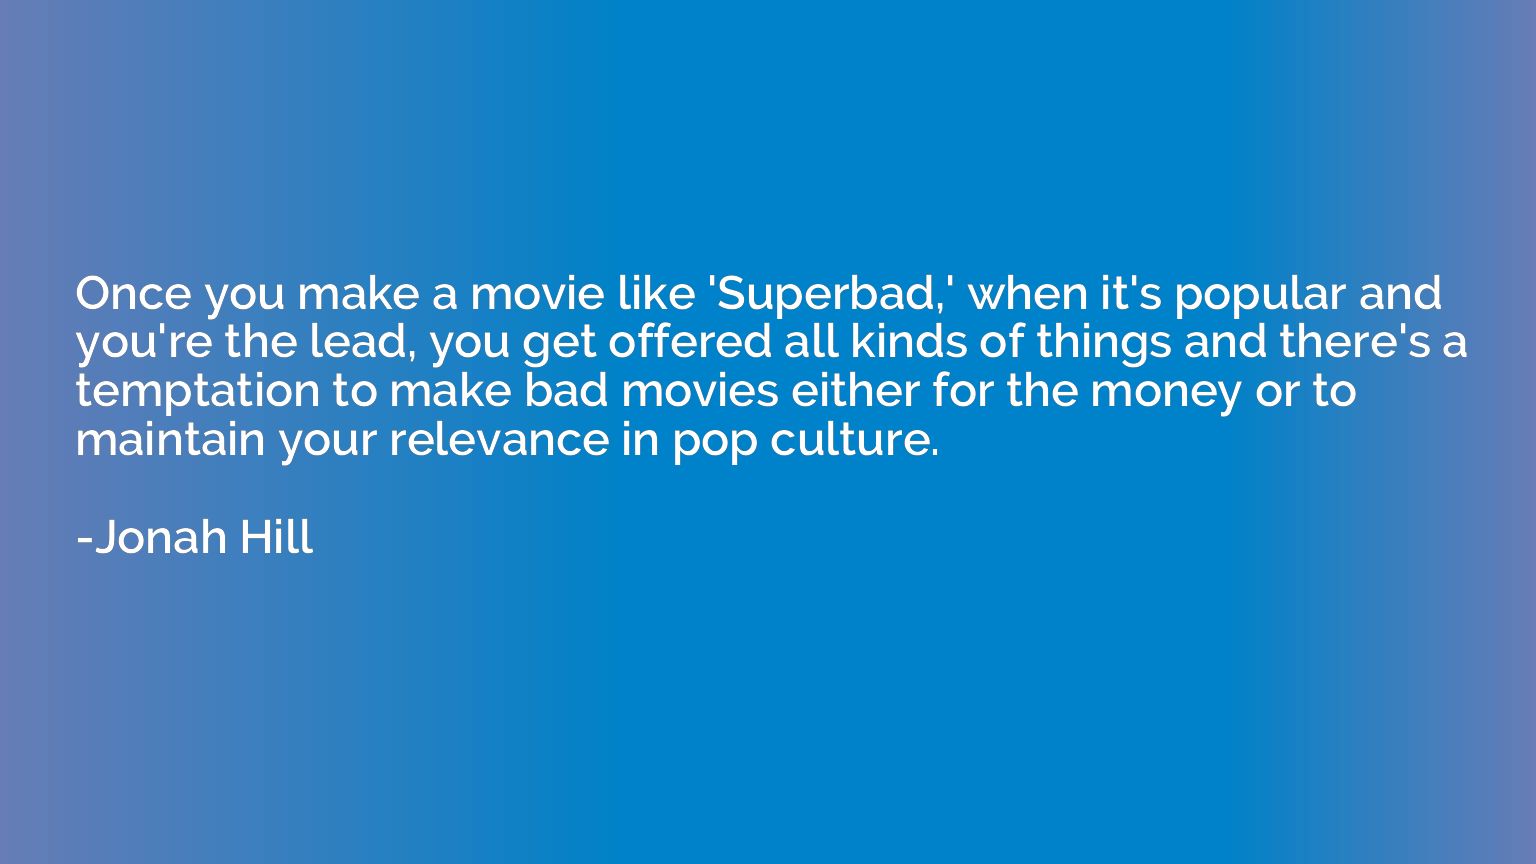 Once you make a movie like 'Superbad,' when it's popular and